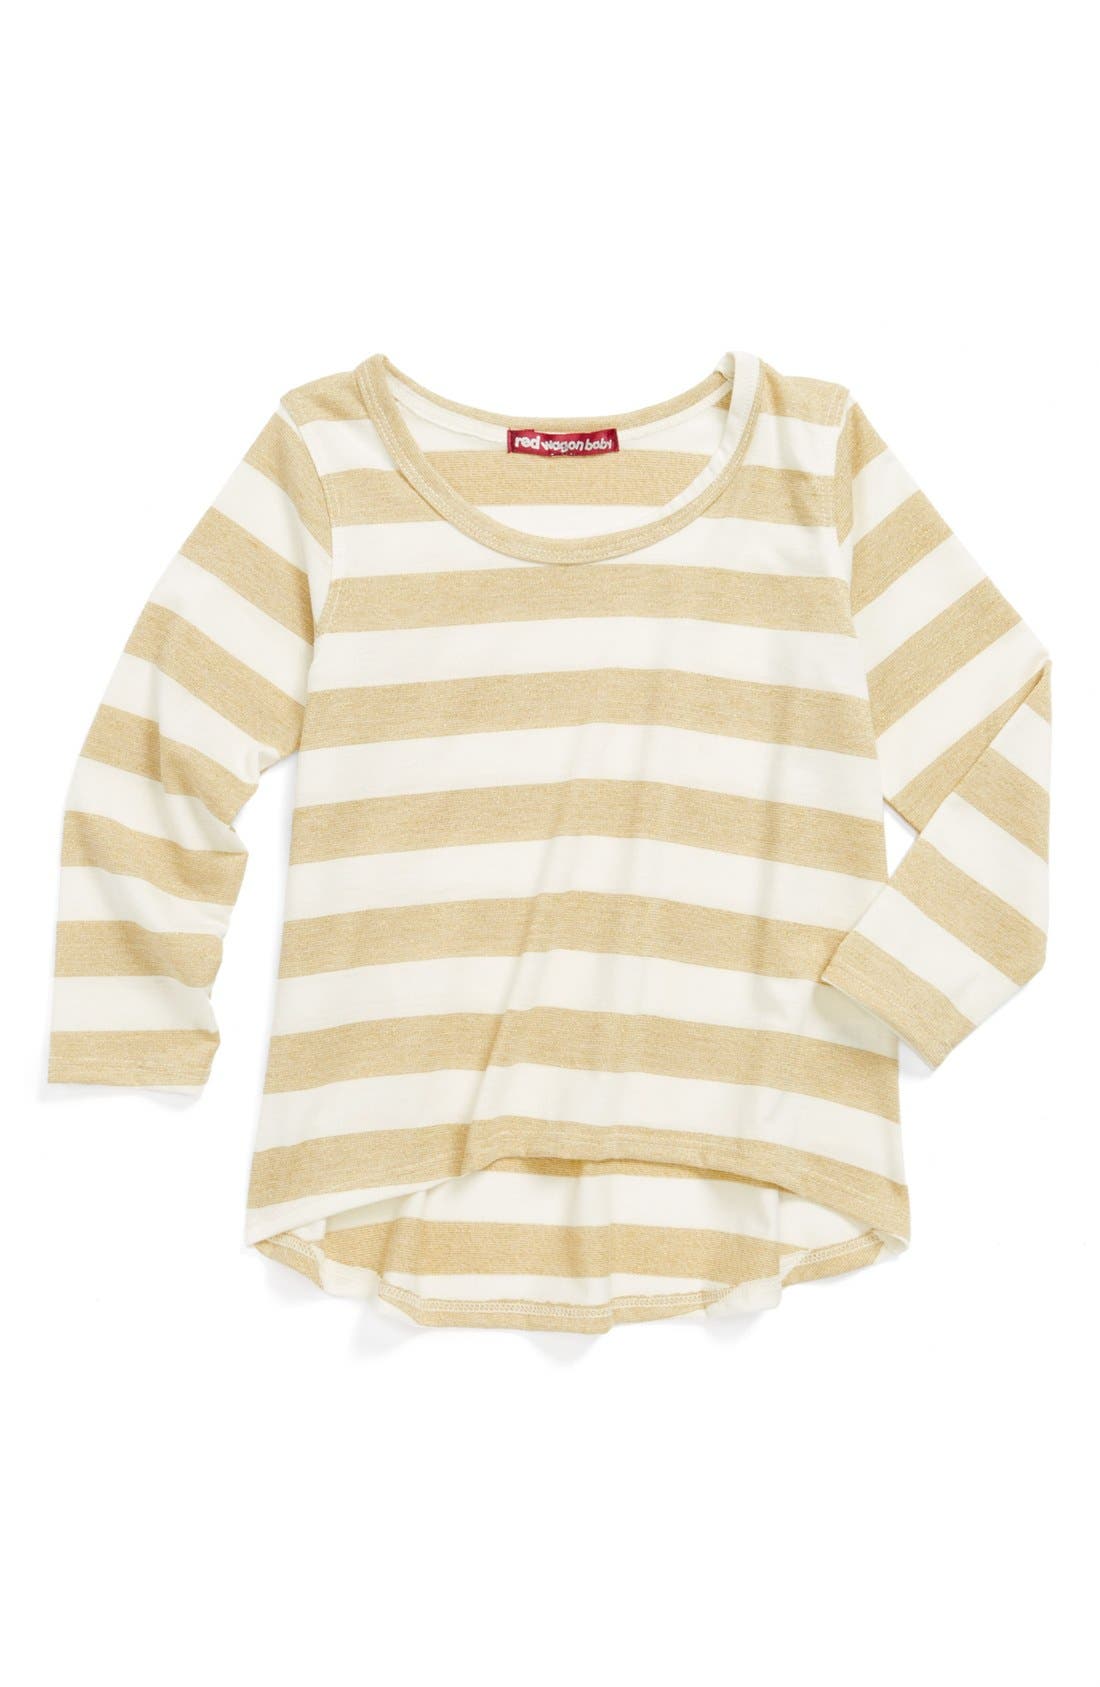 RED WAGON Girls Long Sleeve Top Pack of 3